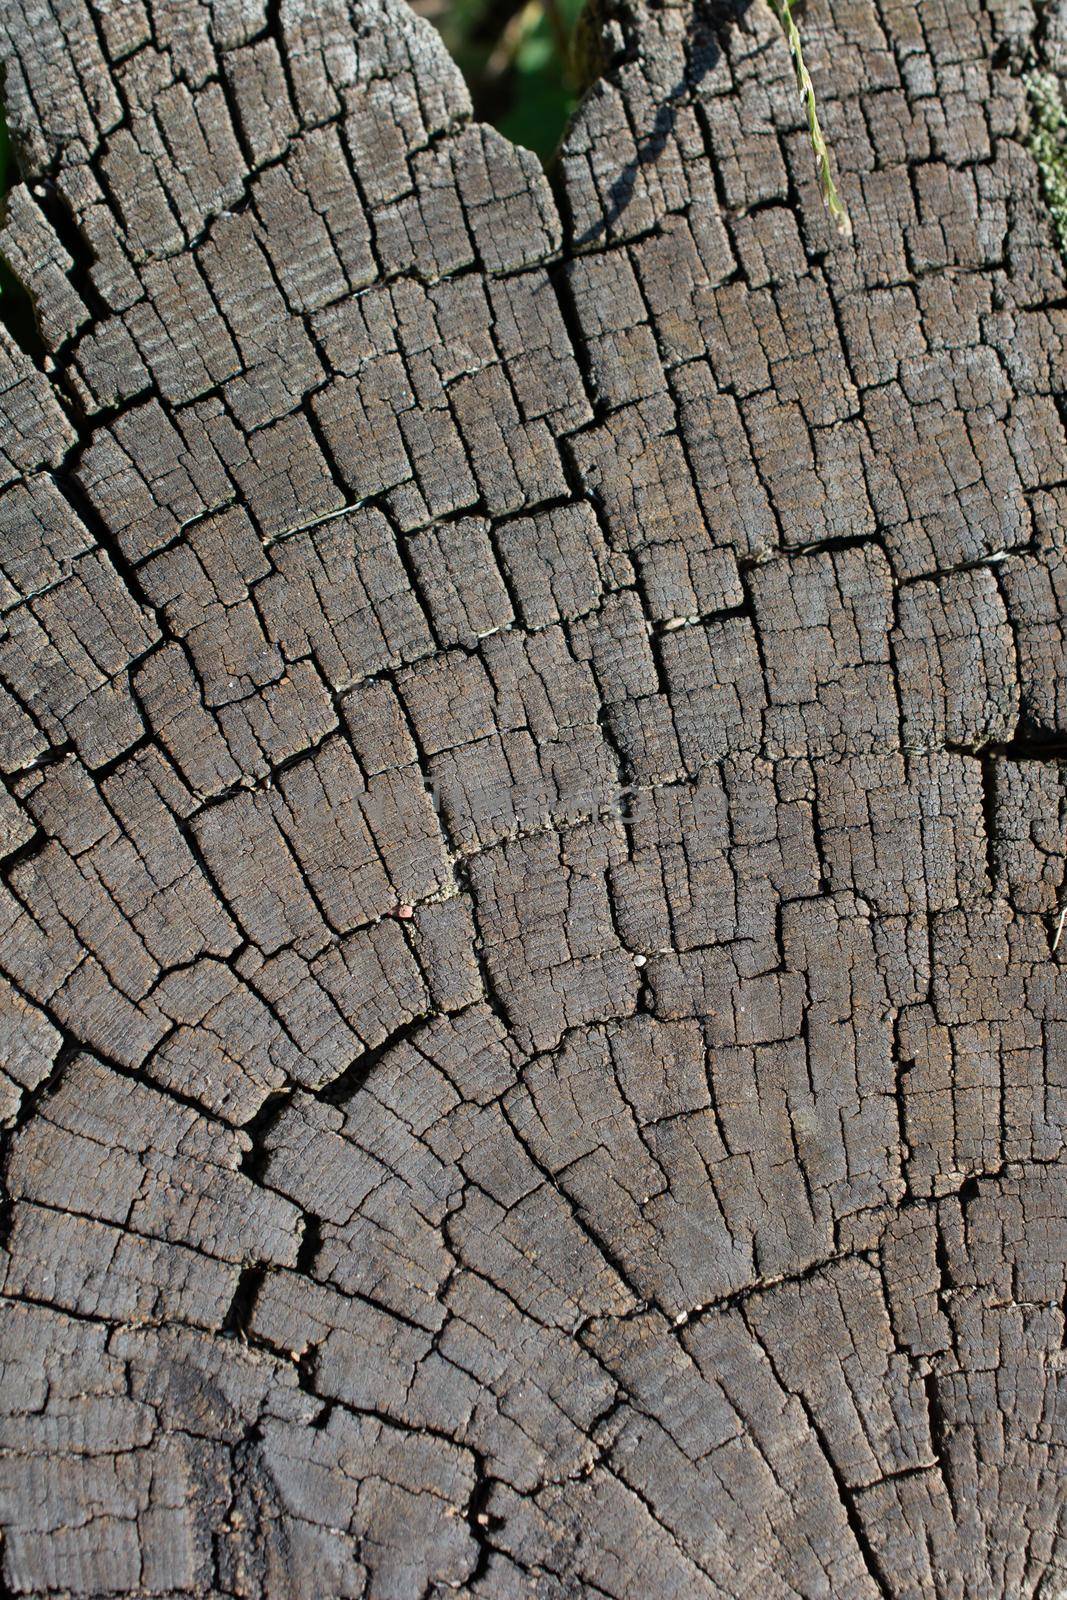 Old Weathered cracked tree stump texture background with the cross section